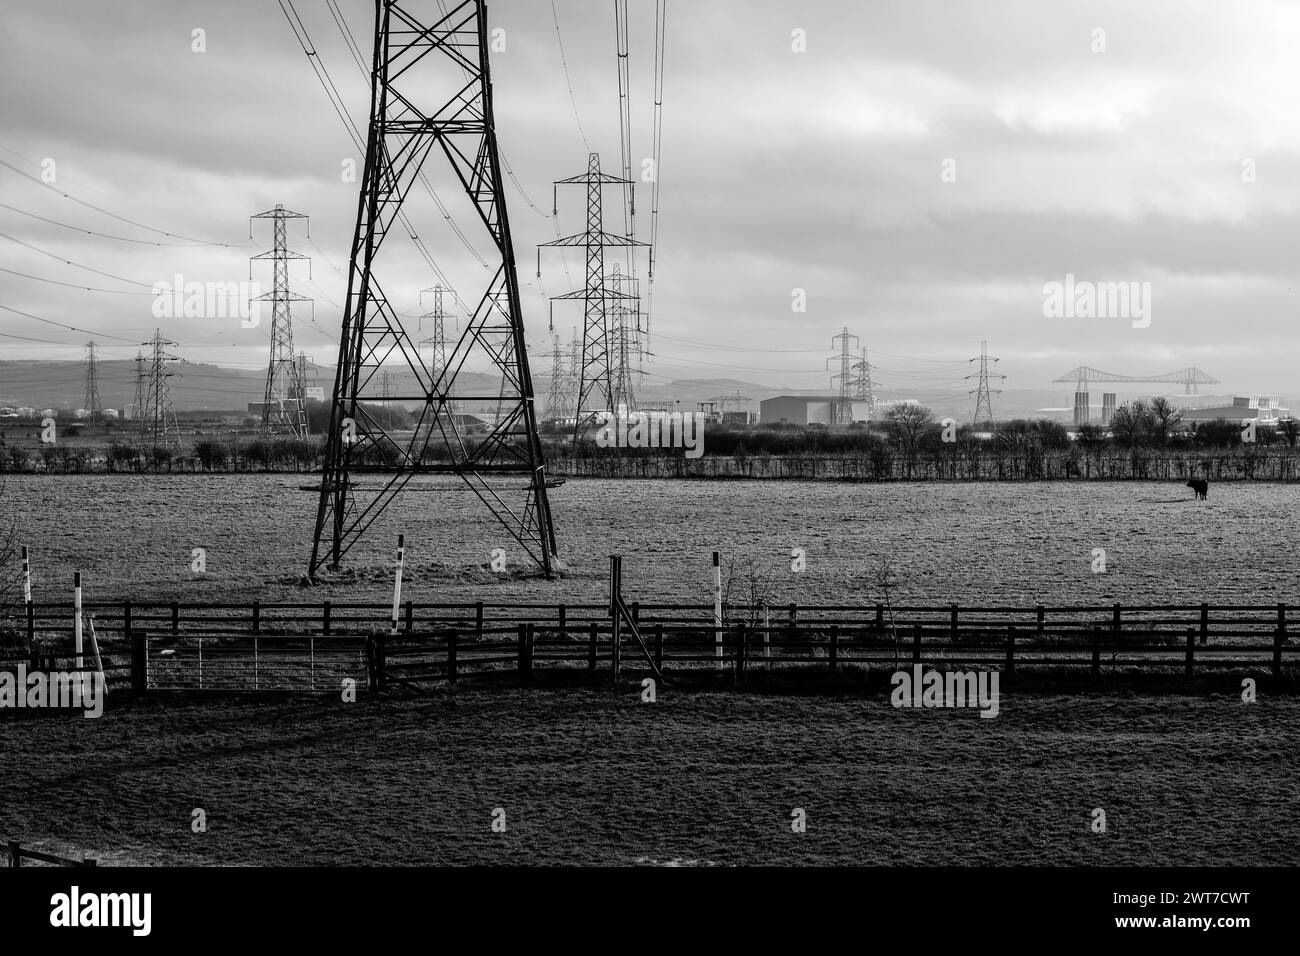 Row of electrical pylons in a field, view towards Middlesbrough, tees transporter bridge can be seen in the distance. North East England, UK. Stock Photo